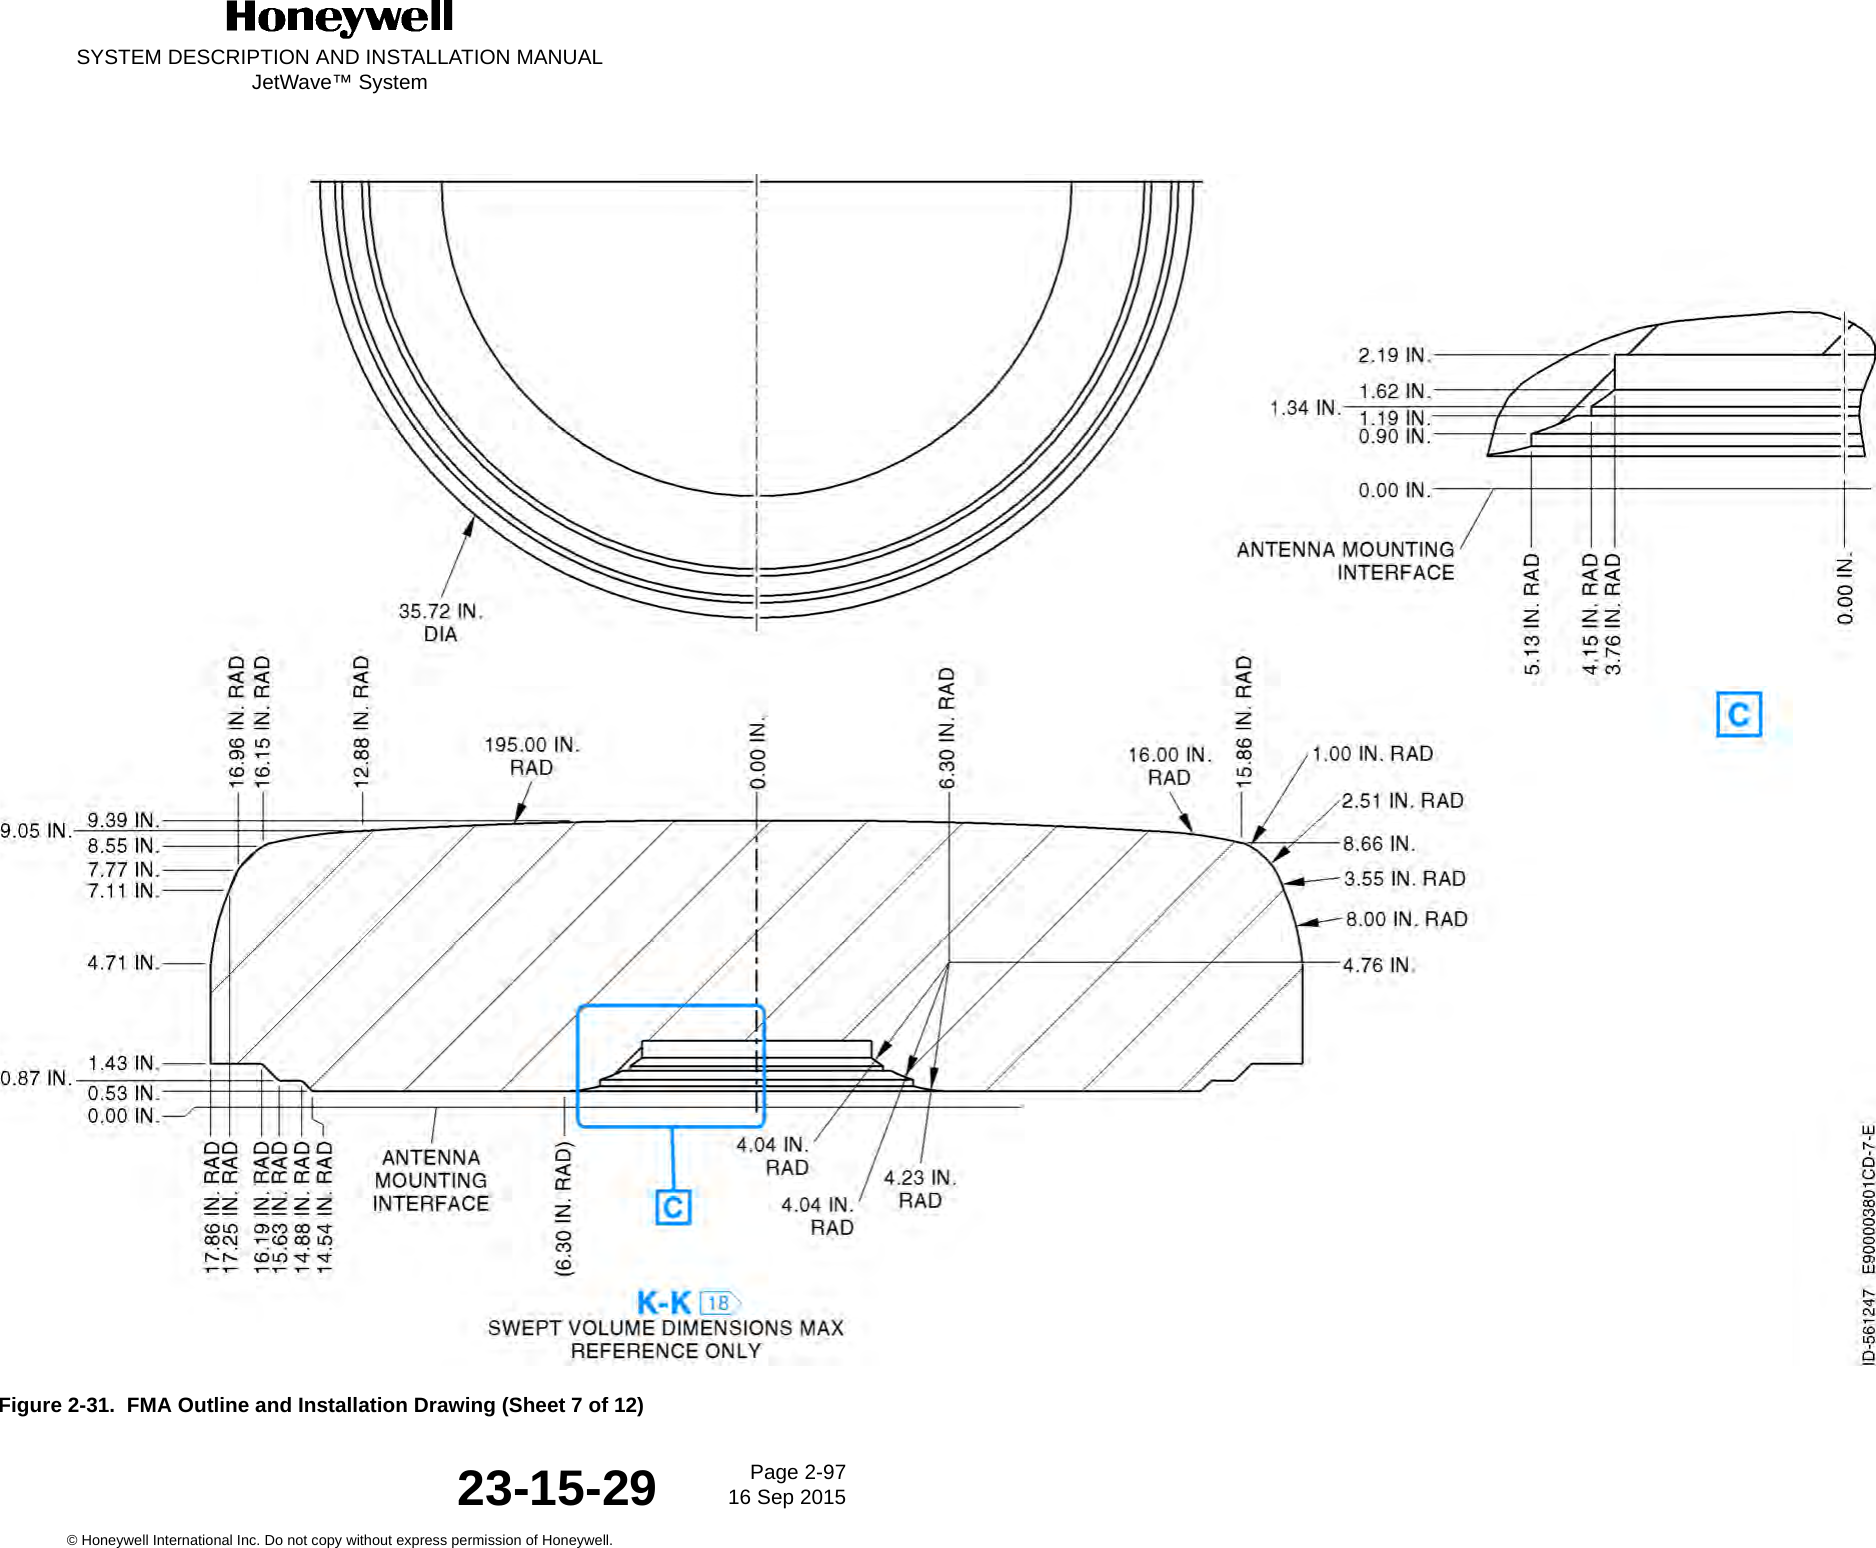 SYSTEM DESCRIPTION AND INSTALLATION MANUALJetWave™ SystemPage 2-97 16 Sep 2015© Honeywell International Inc. Do not copy without express permission of Honeywell.23-15-29Figure 2-31.  FMA Outline and Installation Drawing (Sheet 7 of 12)